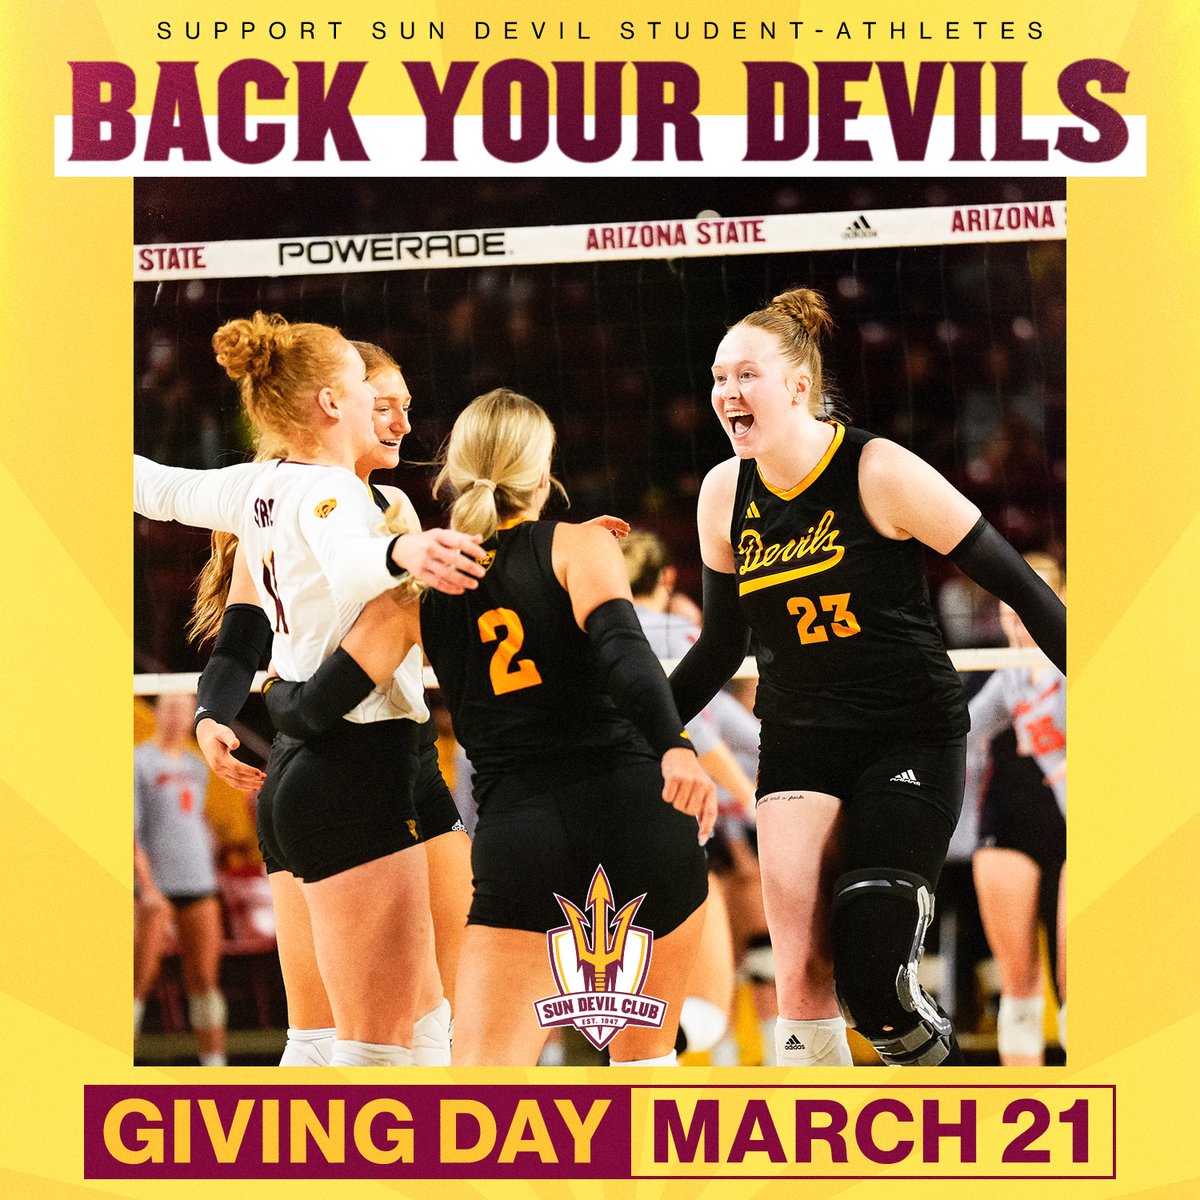 It's Giving Day! 🙌

At the tail end of Back Your Devils Week, help support our student-athletes by giving to our program today! 🔱

Donate here >> bit.ly/48ZVeJh

#ForksUp /// #BackYourDevils